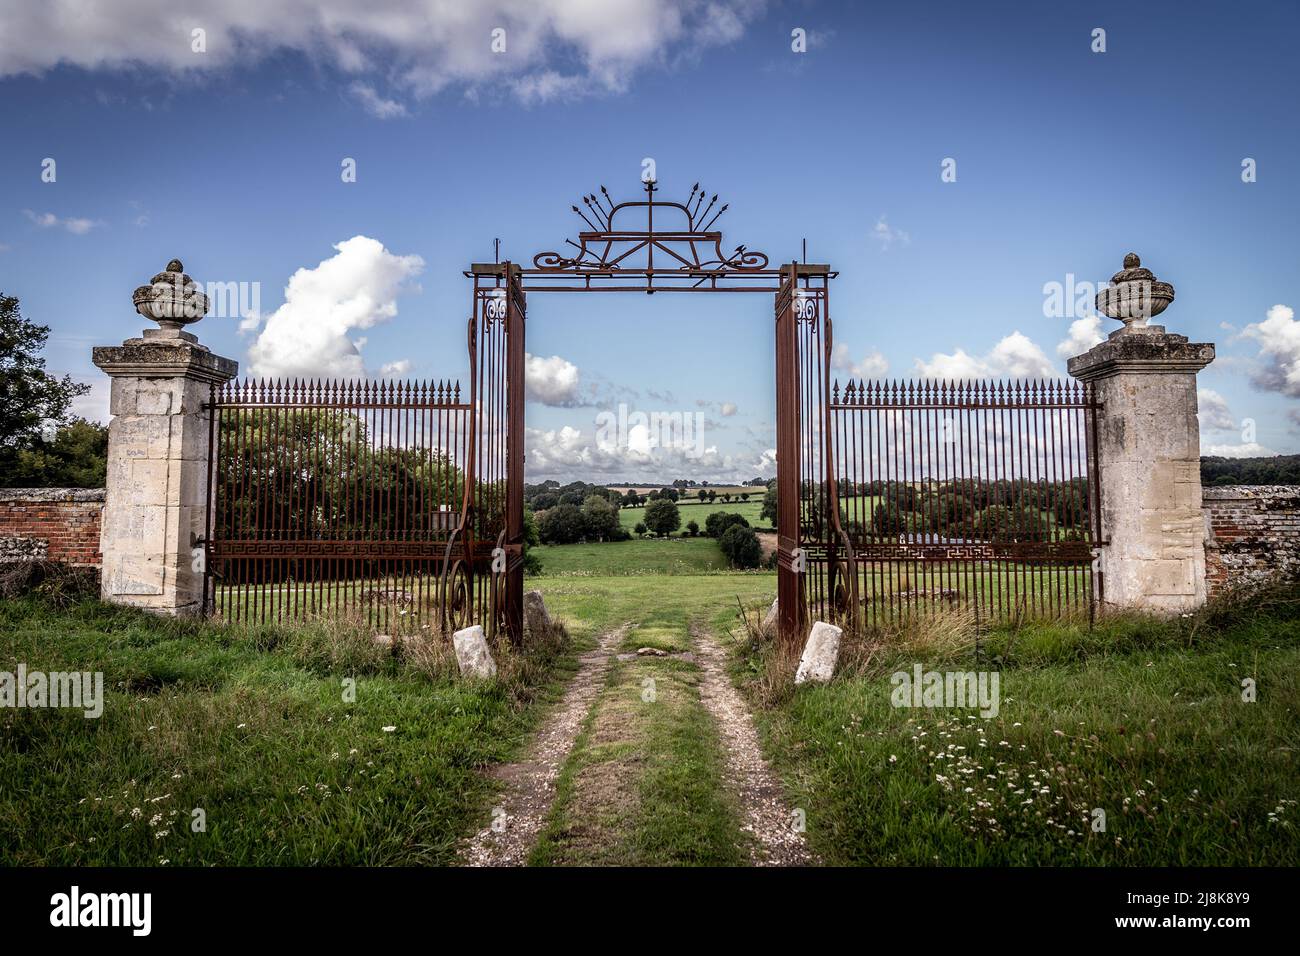 The old and rustic gates from an abandoned country house Stock Photo